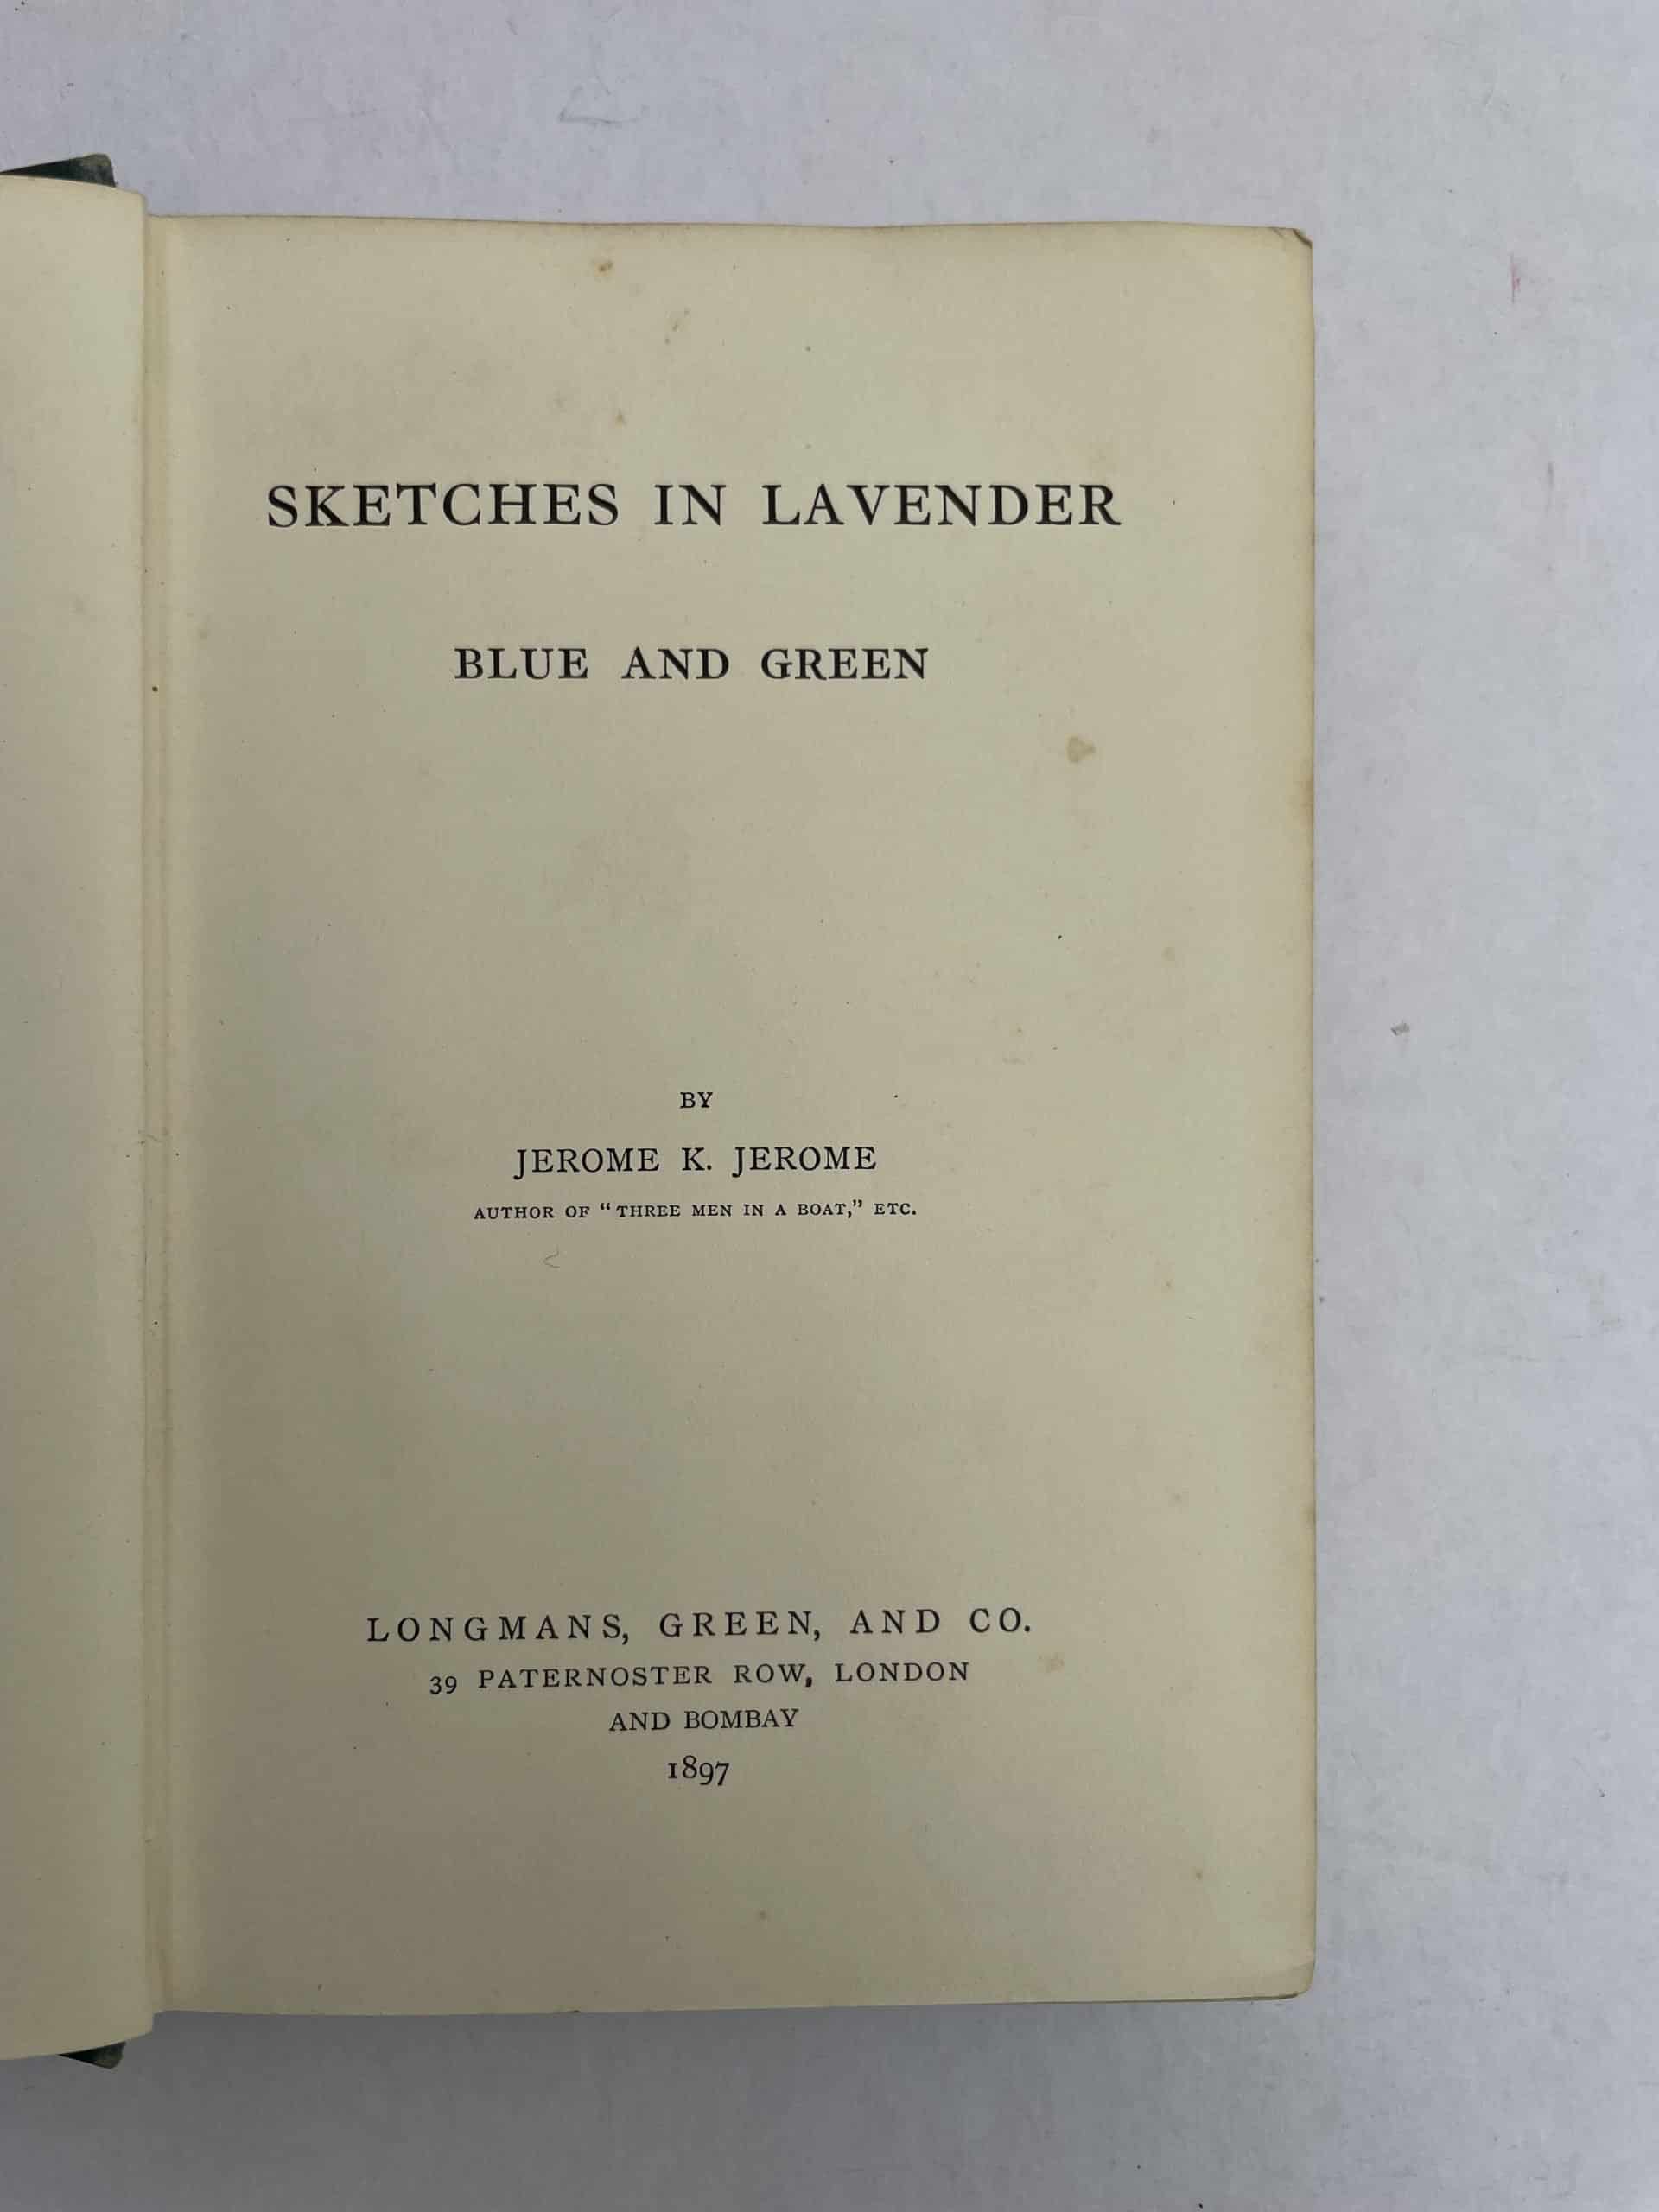 jerome k jerome sketches first edition2